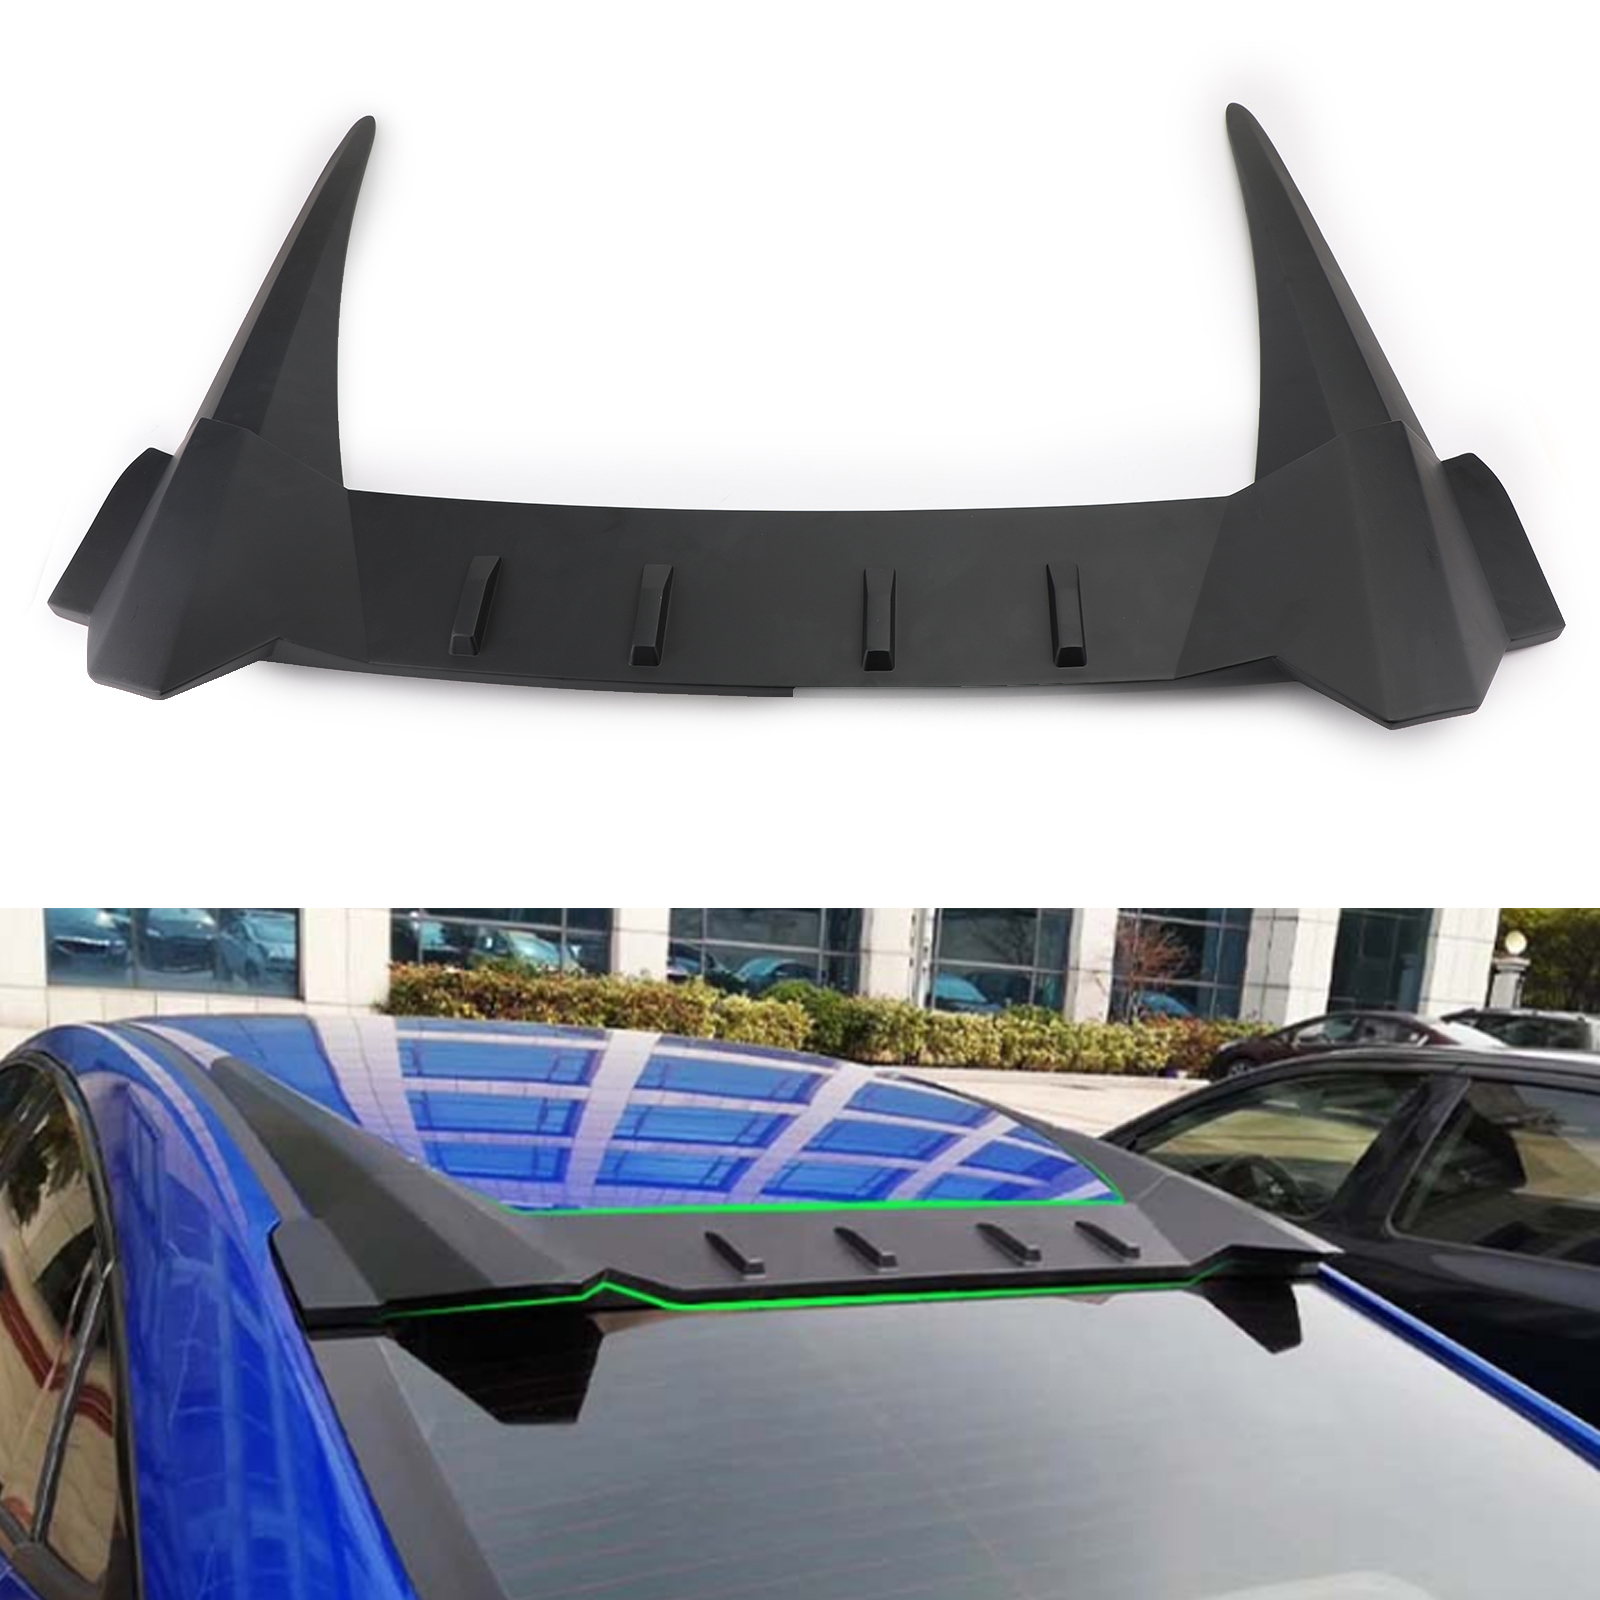 

US STOCK Areyourshop Rear Window Roof Spoiler Wing For HONDA CIVIC 10th Sedan 16 17 18 Type R Style Car Accessories Auto Parts